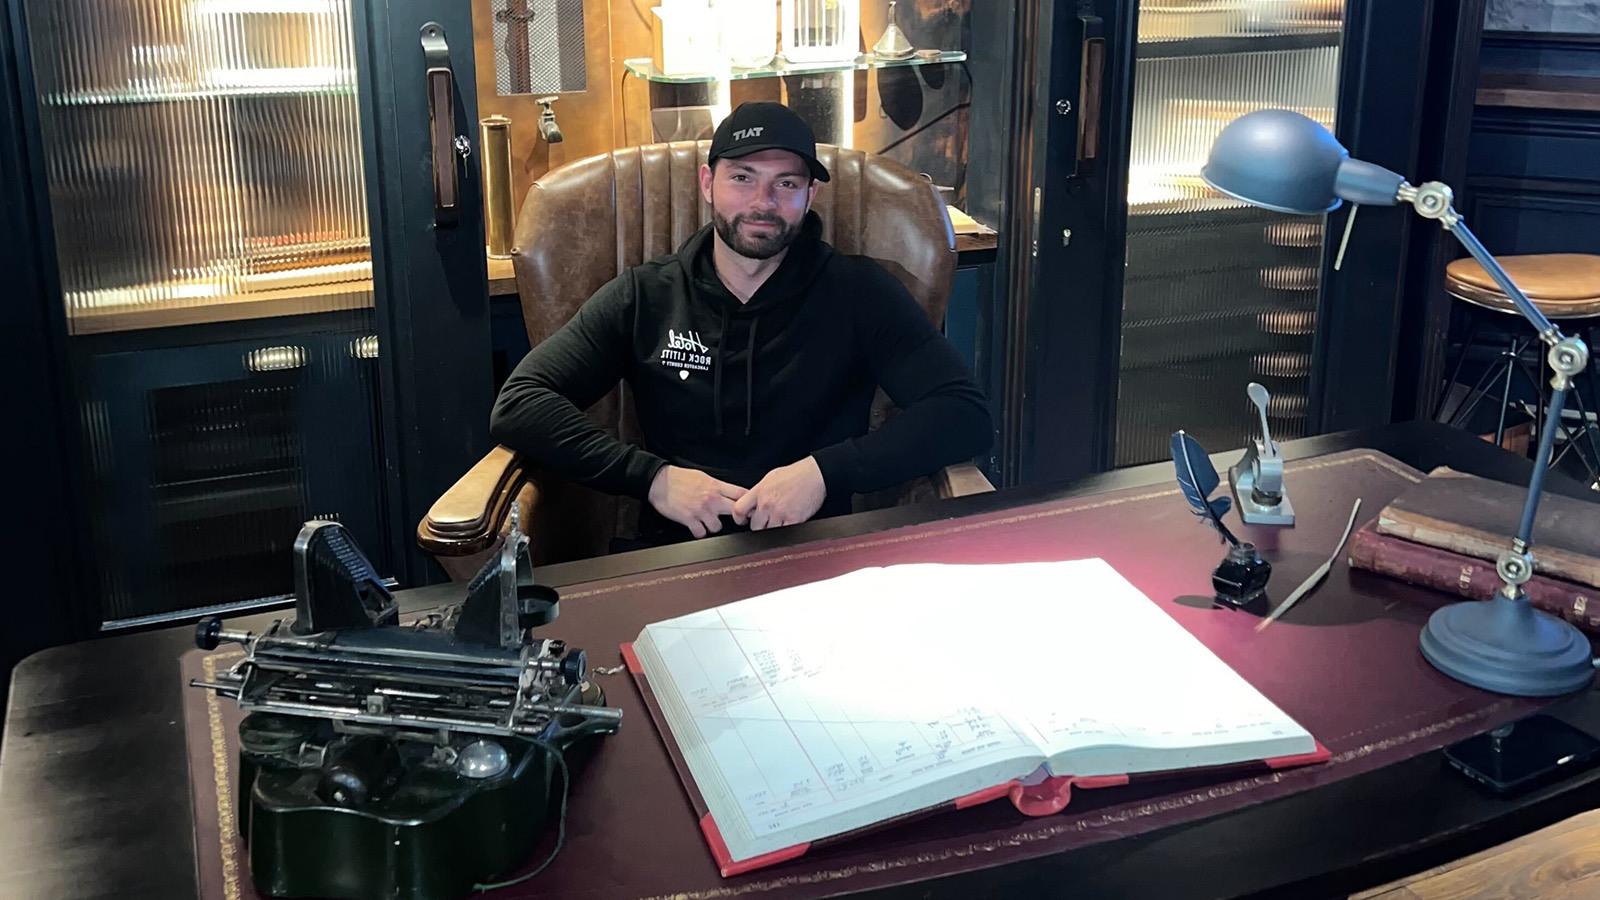 Rob Prager sits in a leather chair behind a large desk. He is smiling and wearing a black baseball cap and a black hoodie.